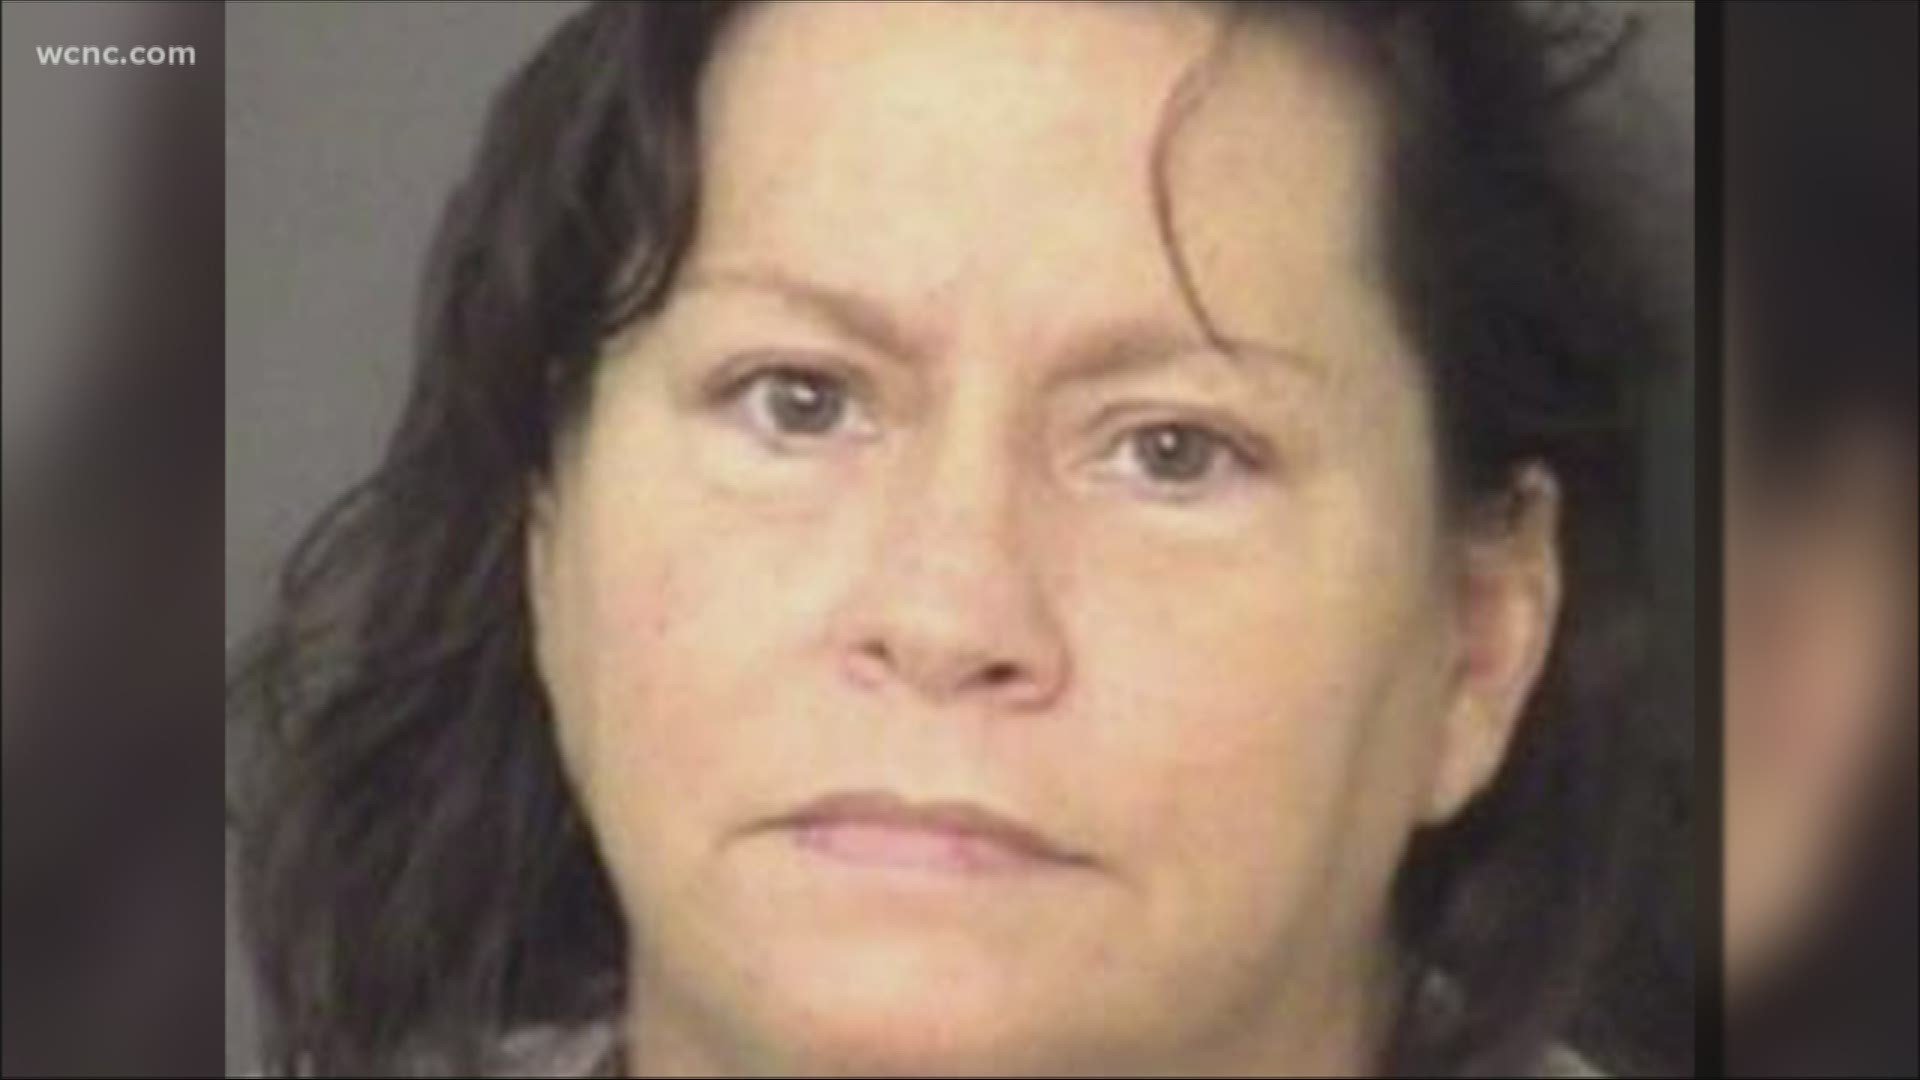 Wife killed her husband, and staged it to look like a home invasion wcnc pic